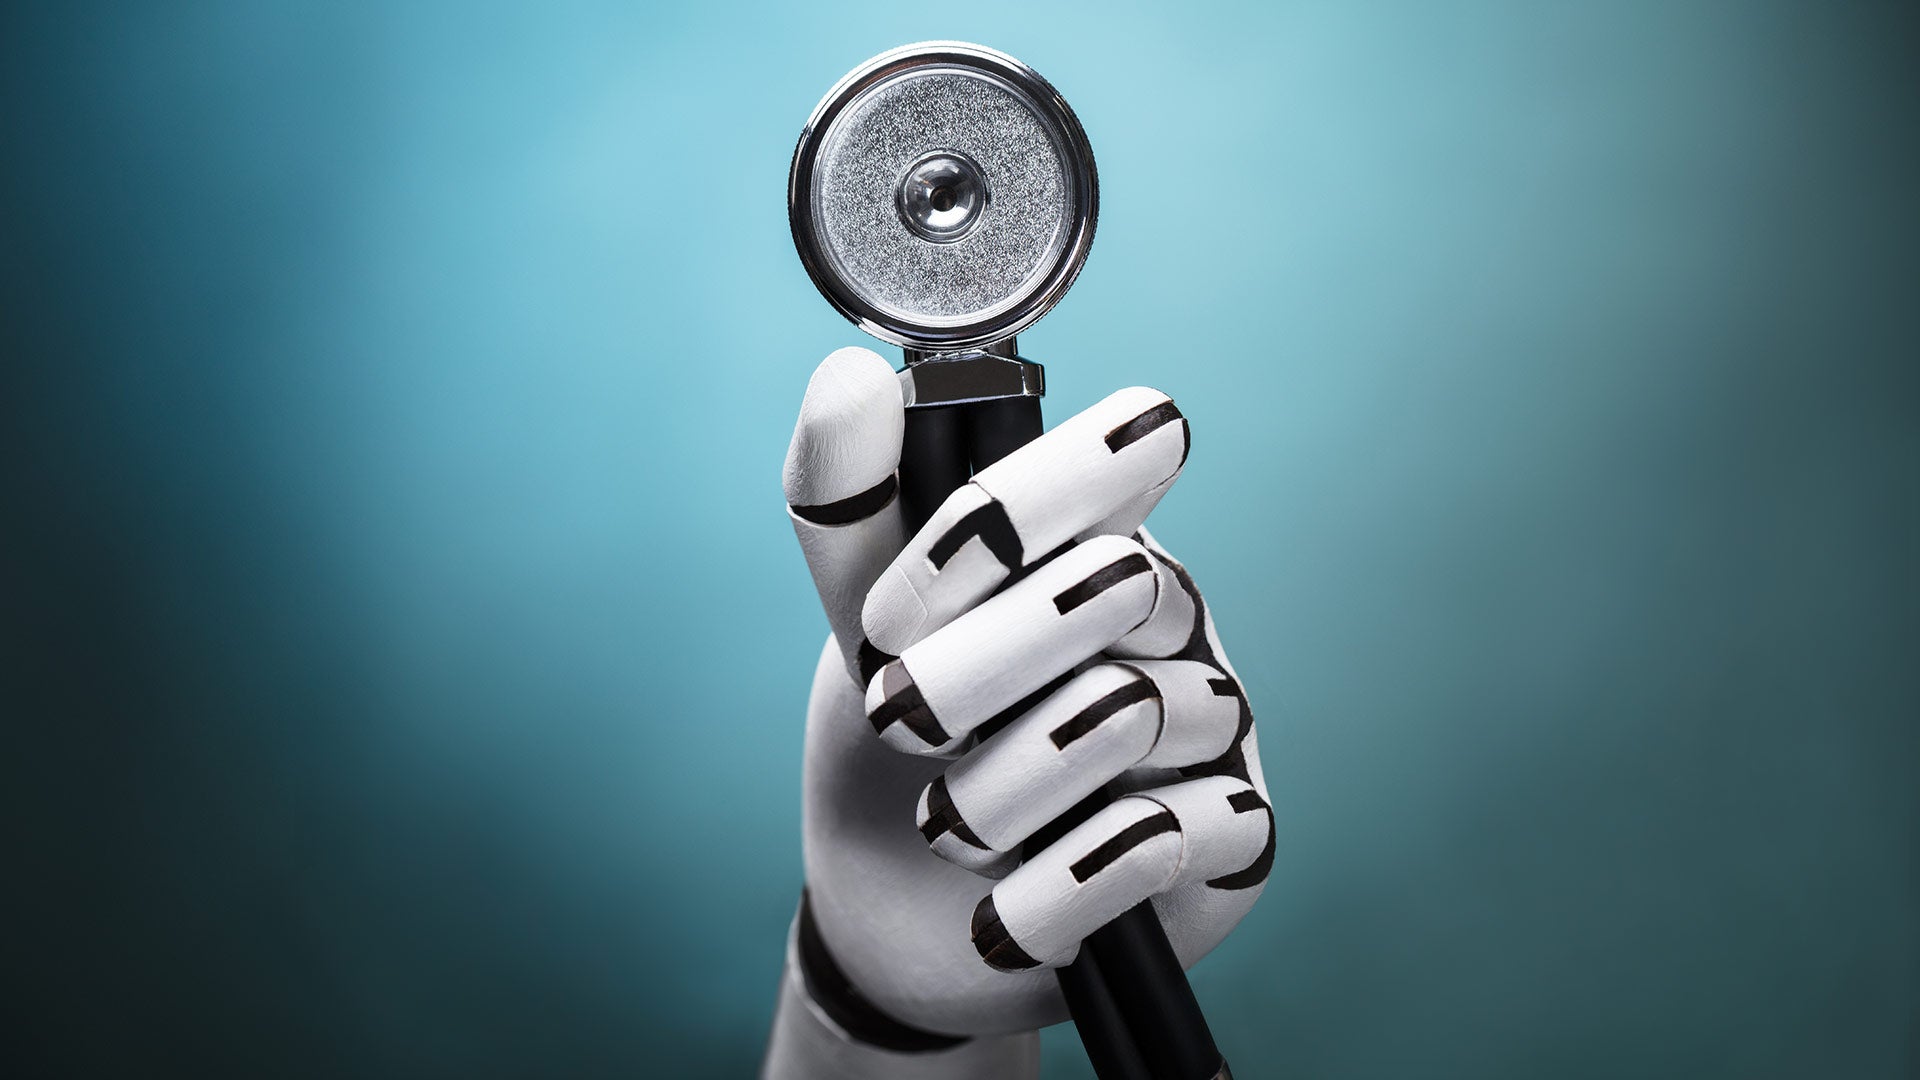 Image of robot hand holding a stethoscope